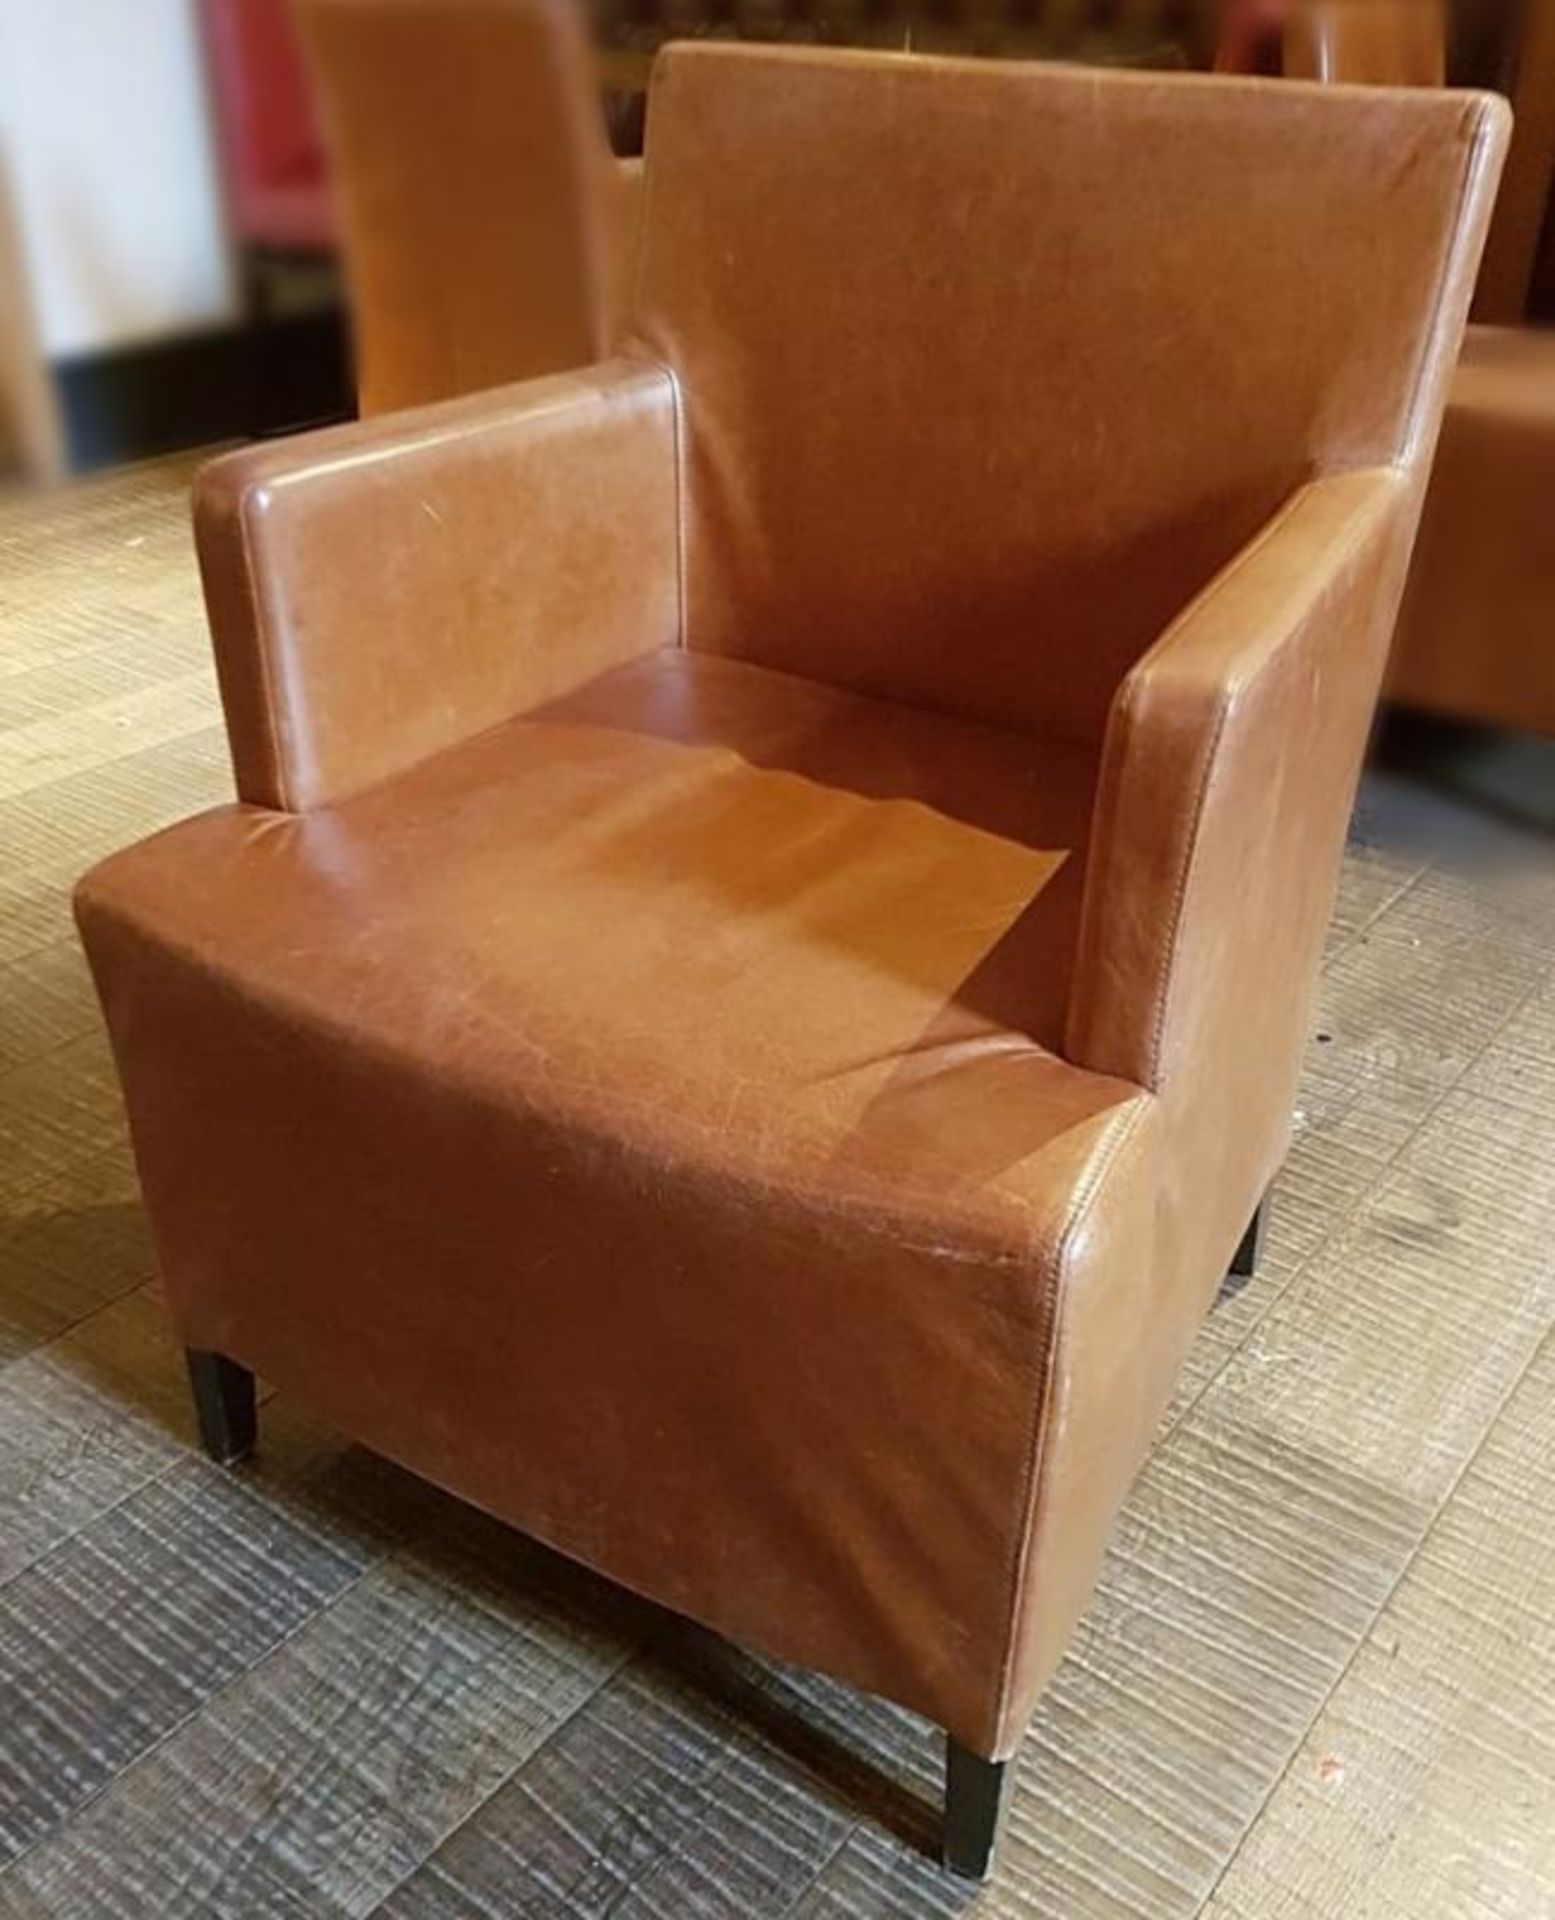 1 x Large Armchair Upholstered In Tan Leather - Recently Removed From A City Centre Steakhouse Resta - Image 2 of 5